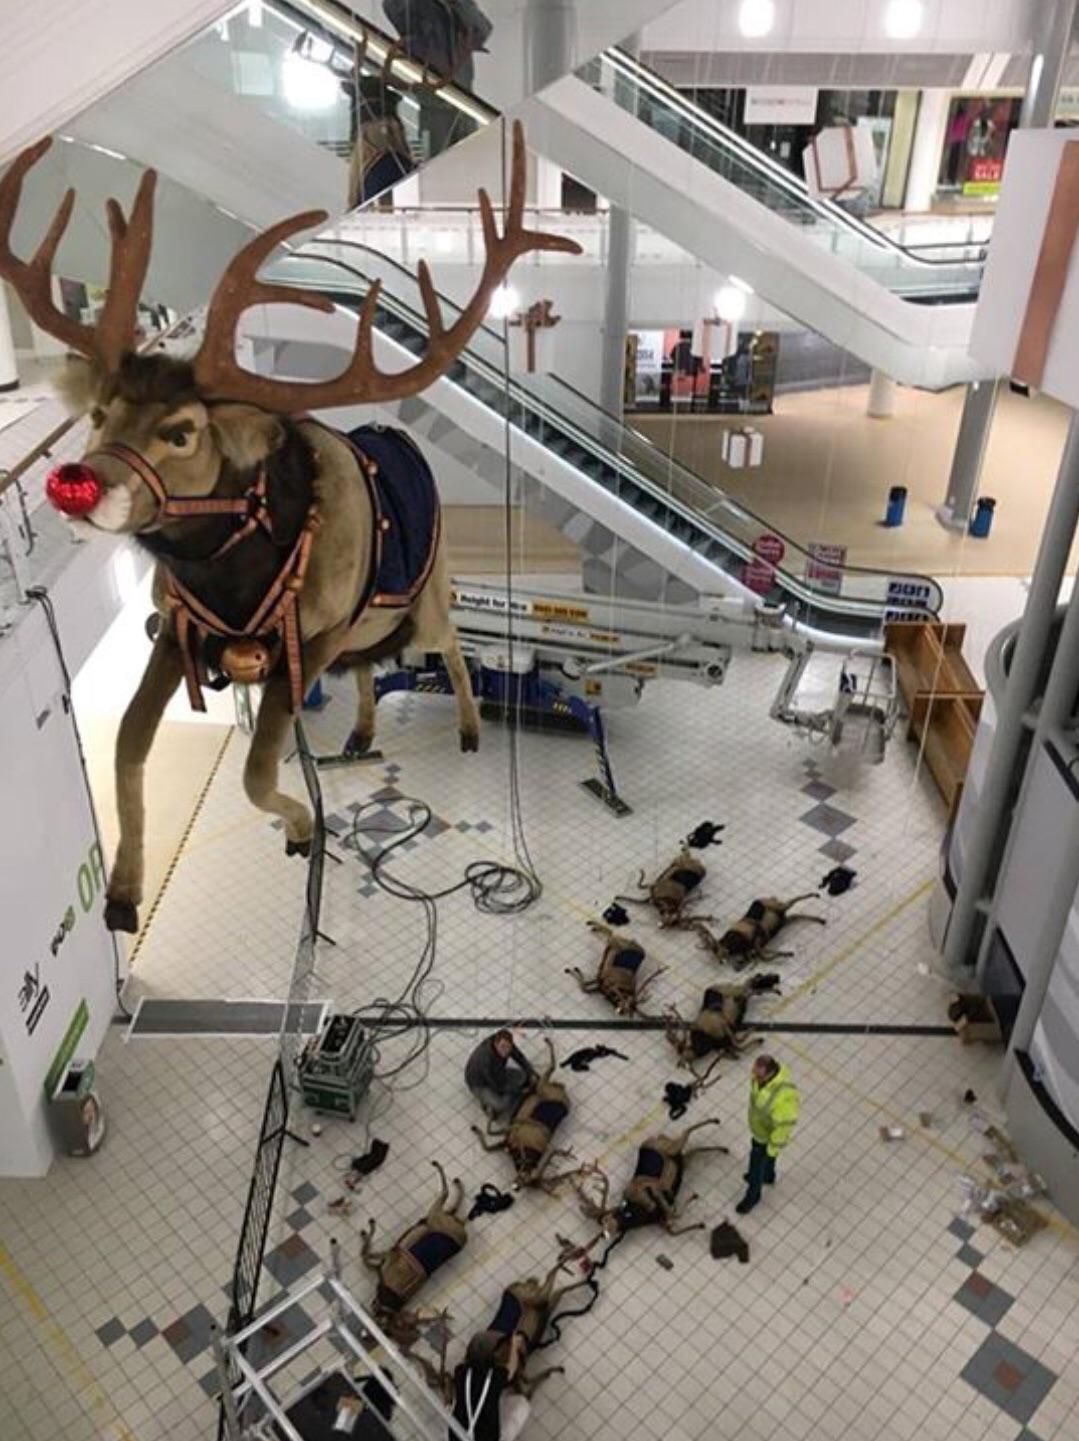 All of the other reindeer used to laugh and call him names: So he murdered them....